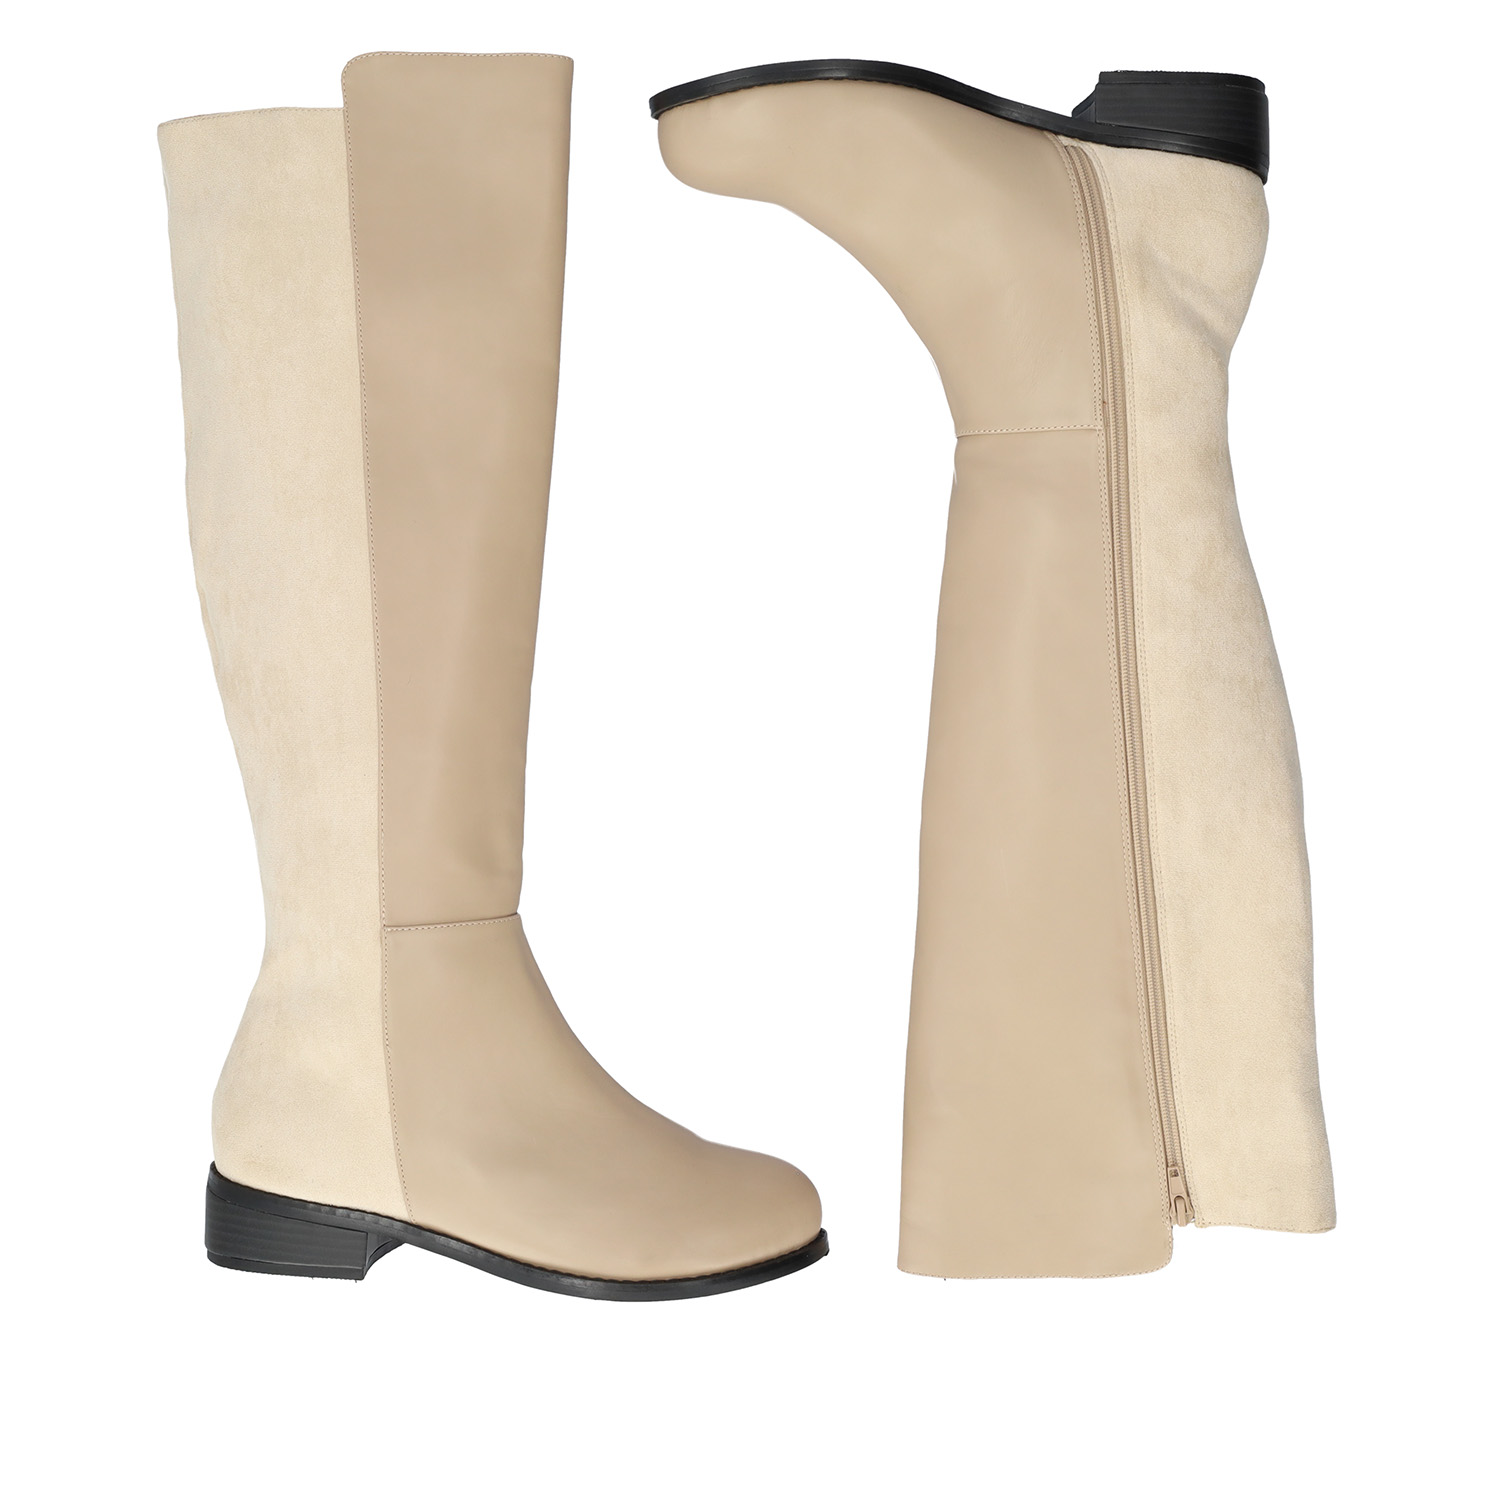 Flat knee-high boots combined in beige colour. 